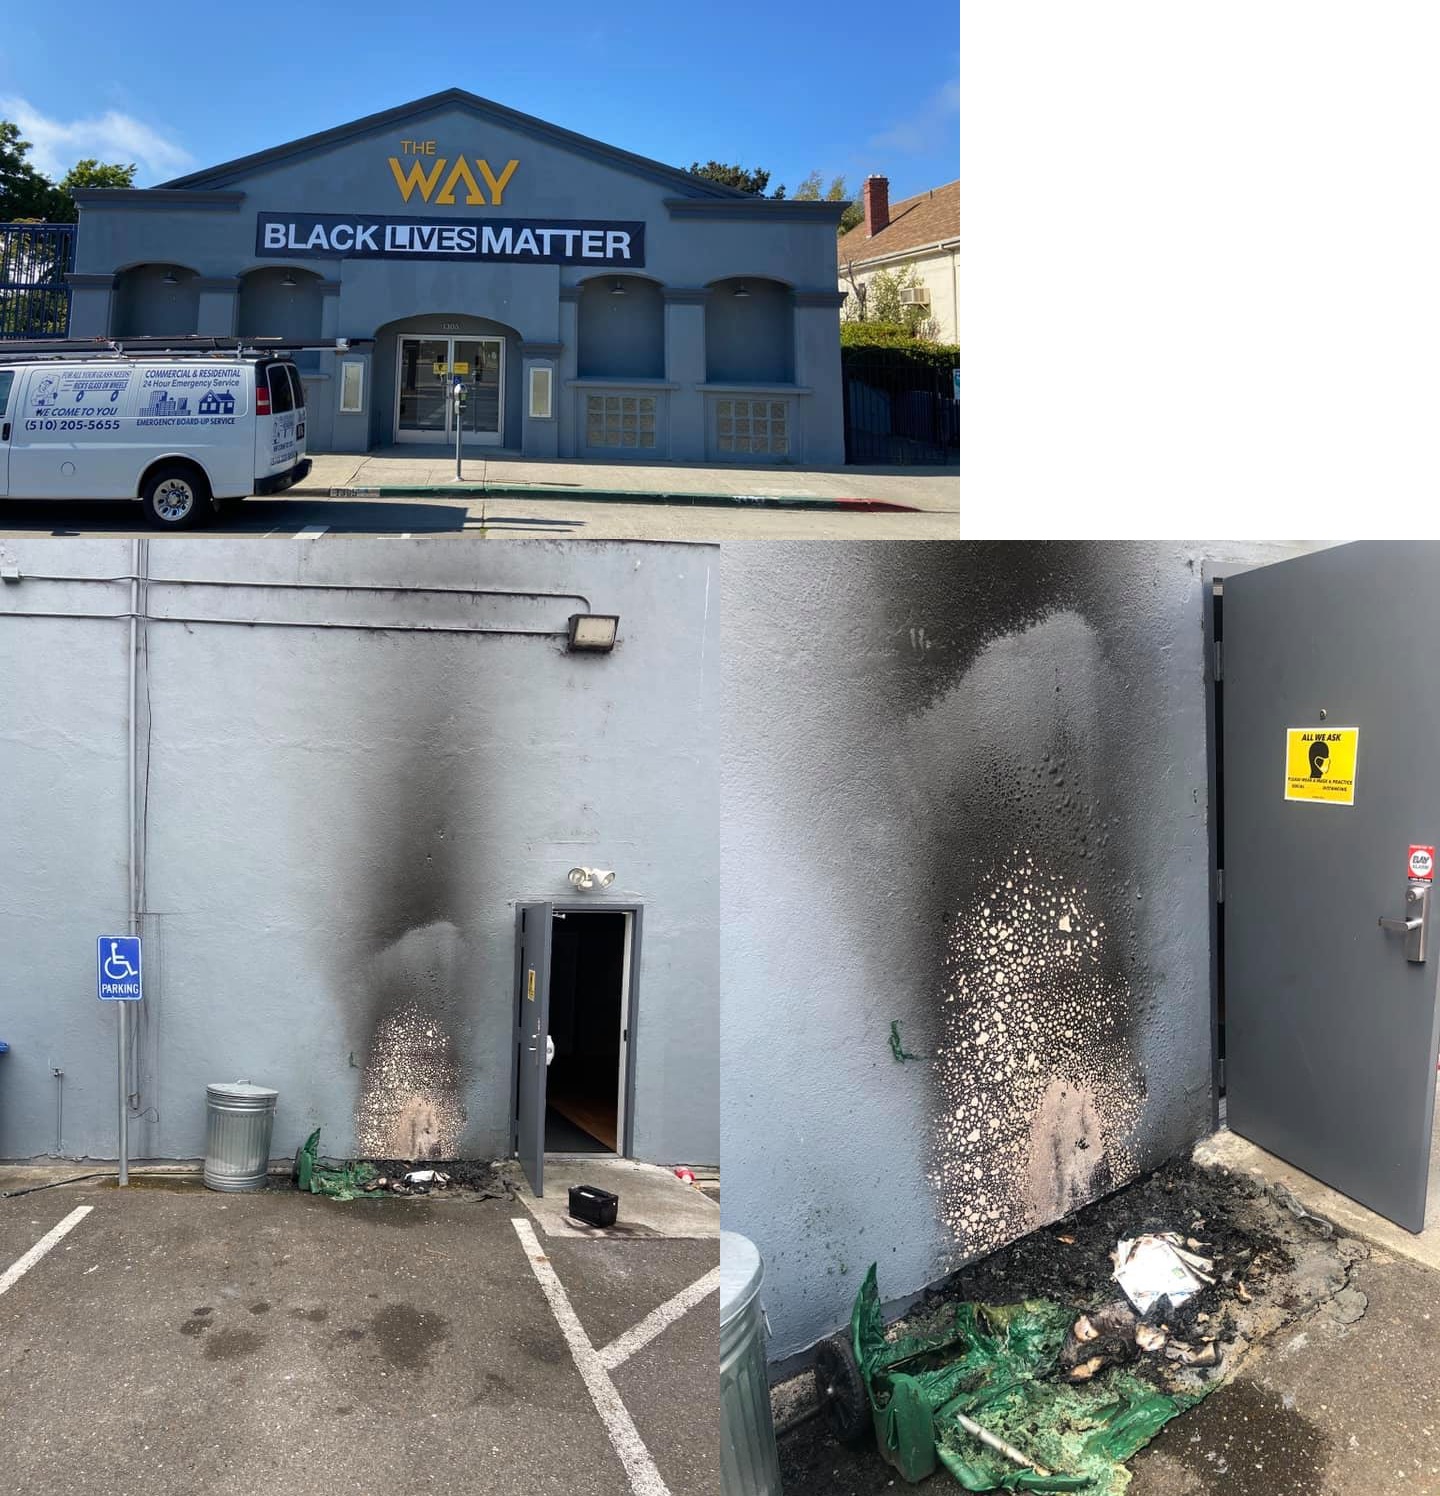 Michael McBride, of Berkeley, California, shared photos of his church, on Facebook. This wasn't a happy moment, though, McBride was highly upset. So much for respecting the church, as an arsonist tried to burn his church, The Way Christian Center, after they posted #BlackLivesMatter on the front of their building.